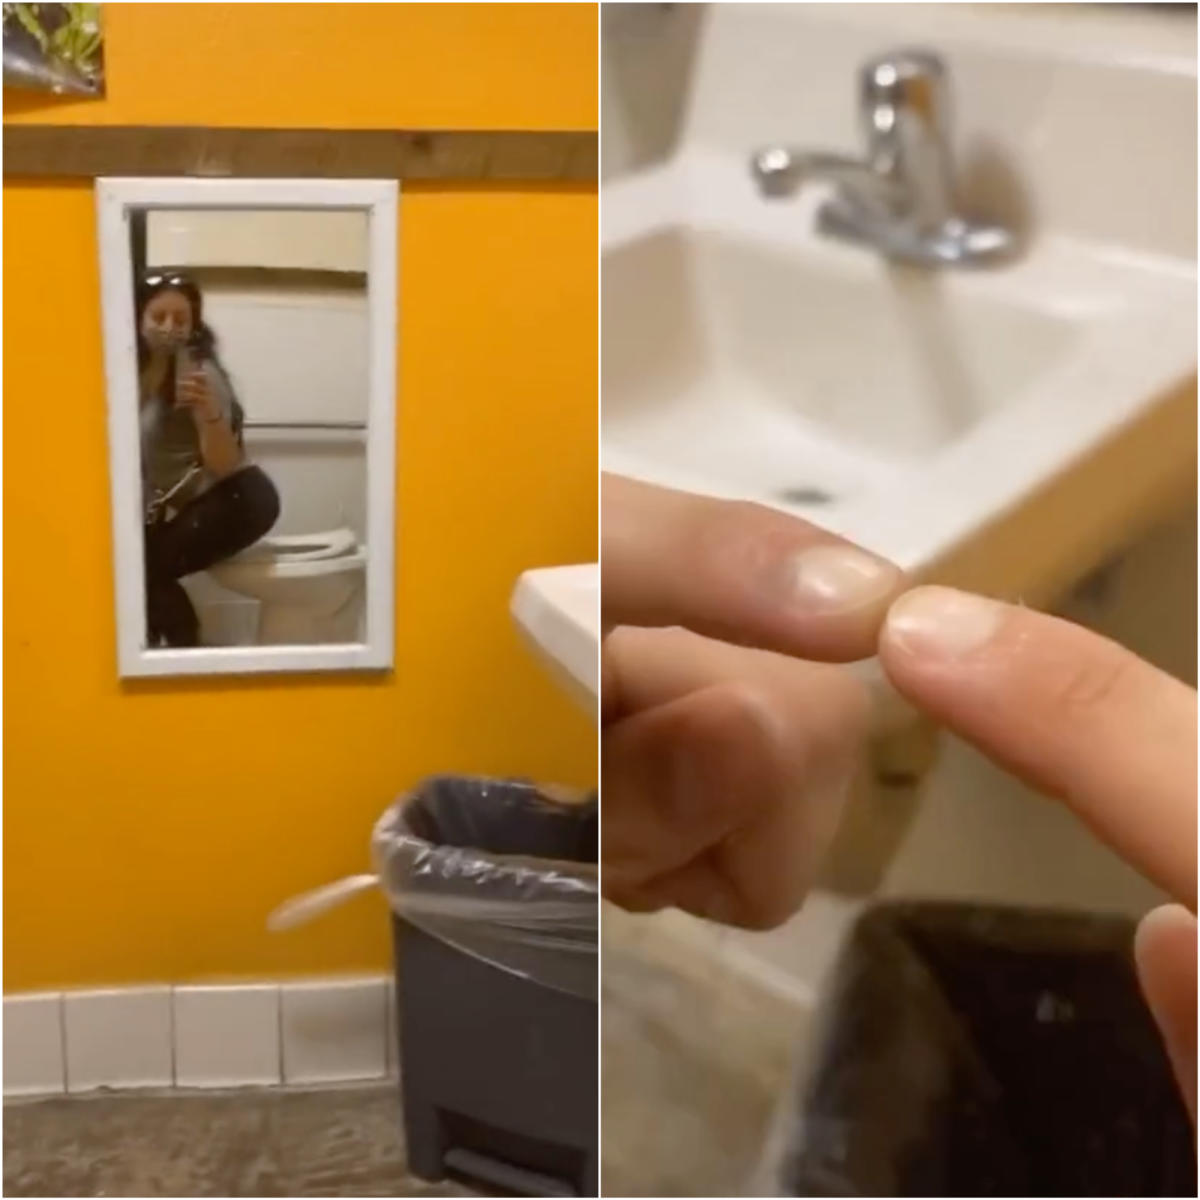 Woman investigates after noticing strangely placed mirror in restaurant  bathroom